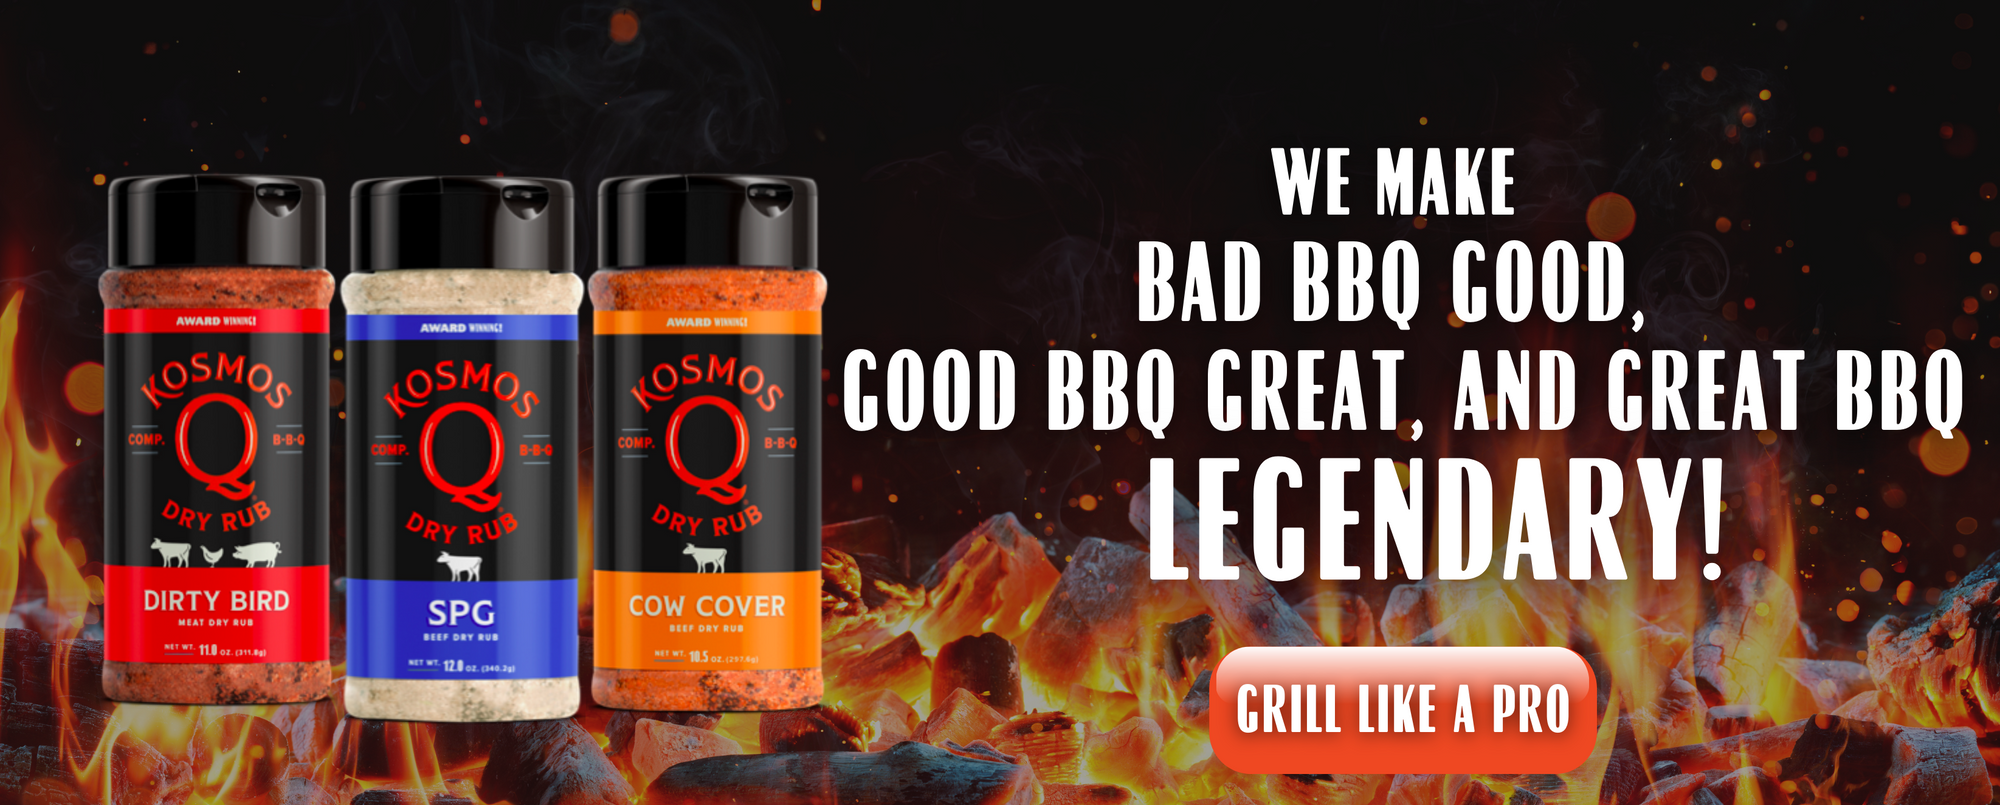 We Make Bad BBQ Good, Good BBQ Great, and Great BBQ Legendary!